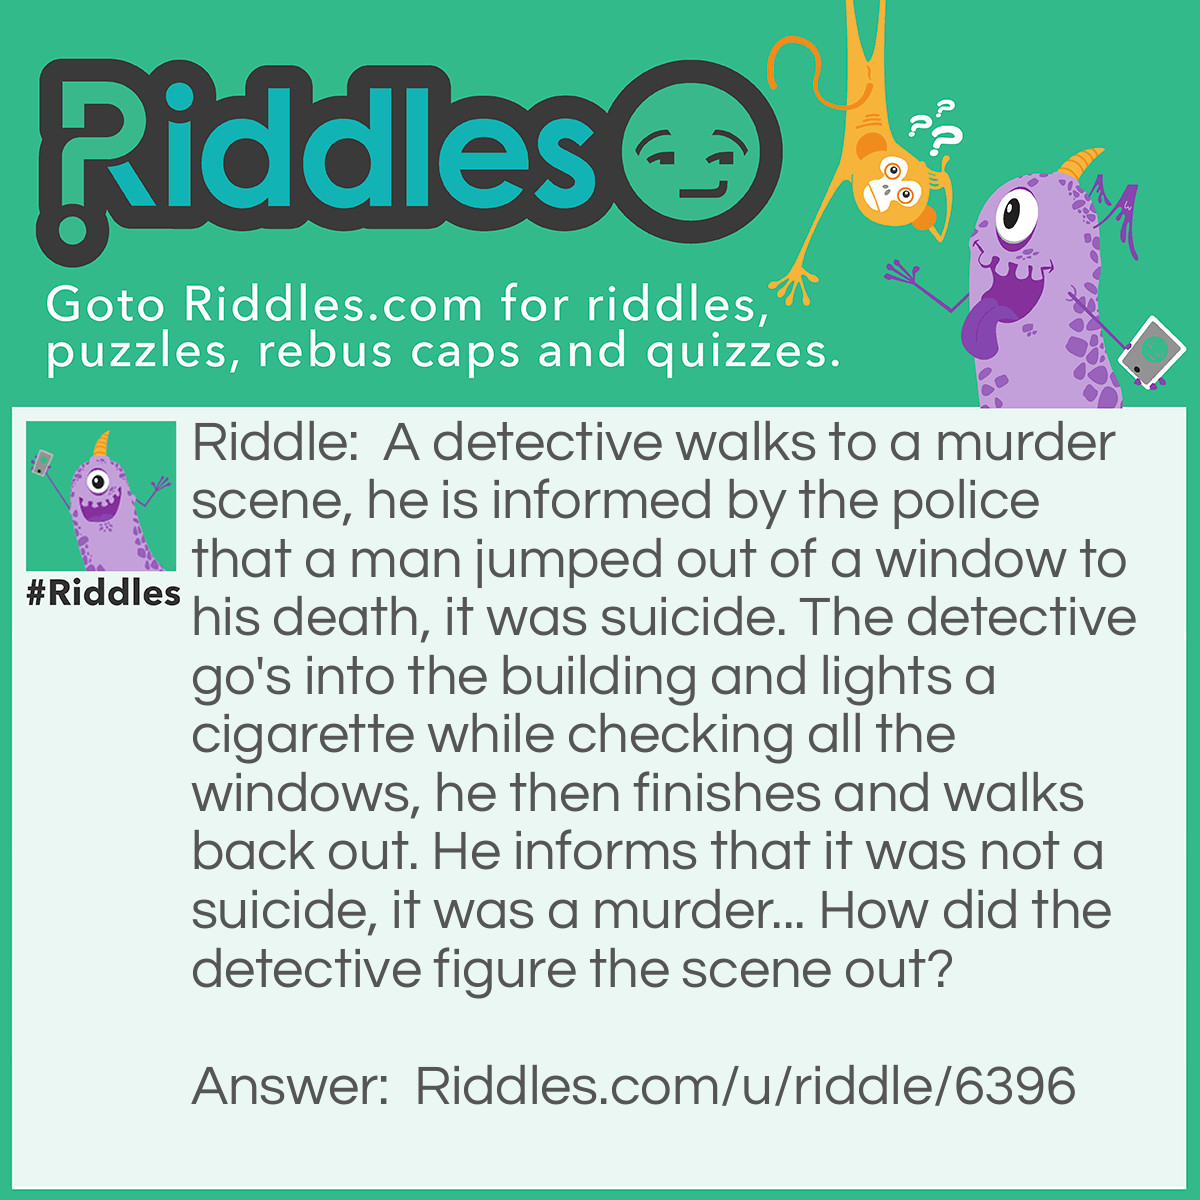 Riddle: A detective walks to a murder scene, he is informed by the police that a man jumped out of a window to his death, it was suicide. The detective go's into the building and lights a cigarette while checking all the windows, he then finishes and walks back out. He informs that it was not a suicide, it was a murder... How did the detective figure the scene out? Answer: One window was smashed open with blood stains on it.